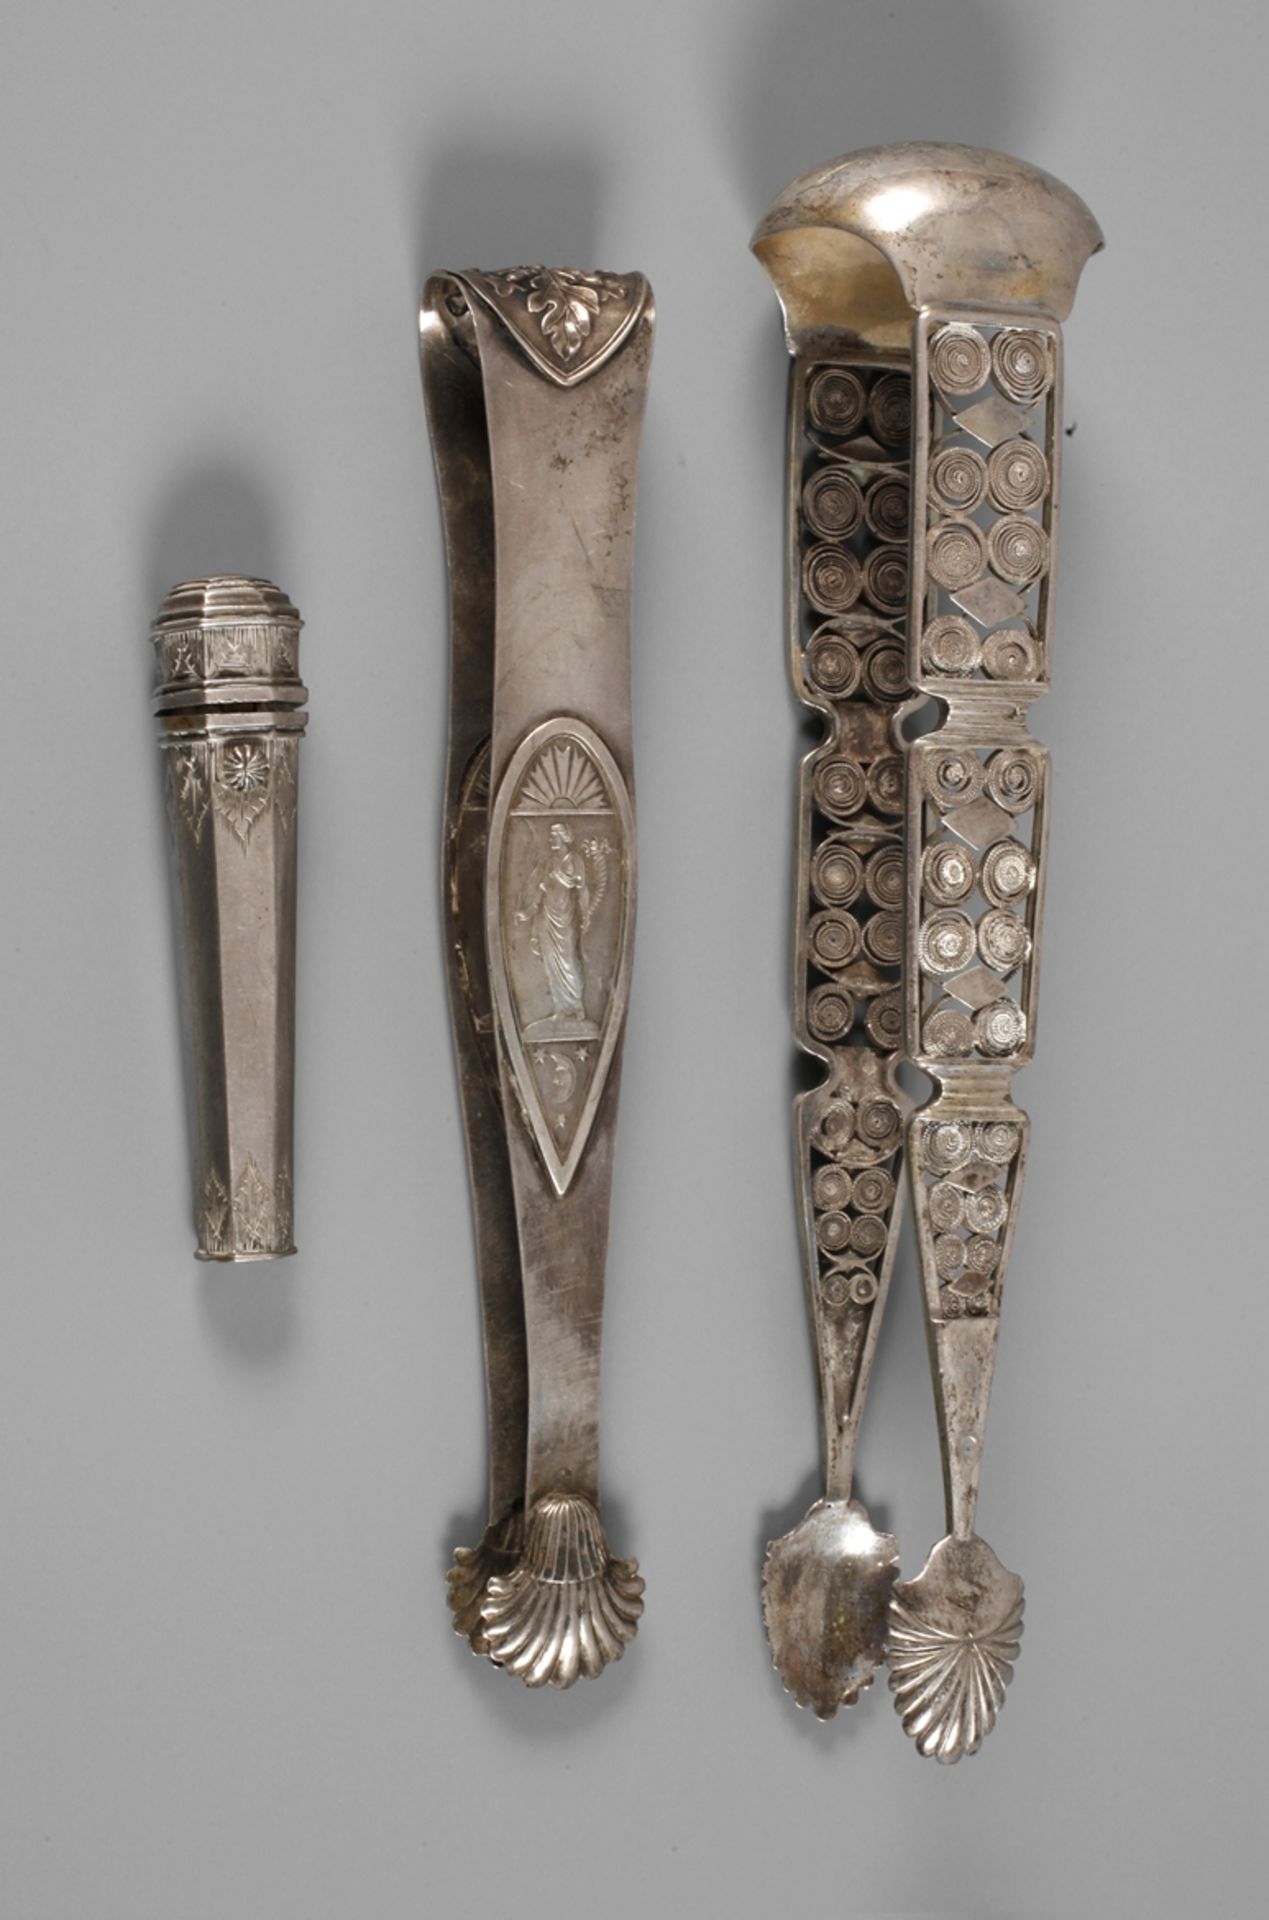 Two sugar tongs and a needle case